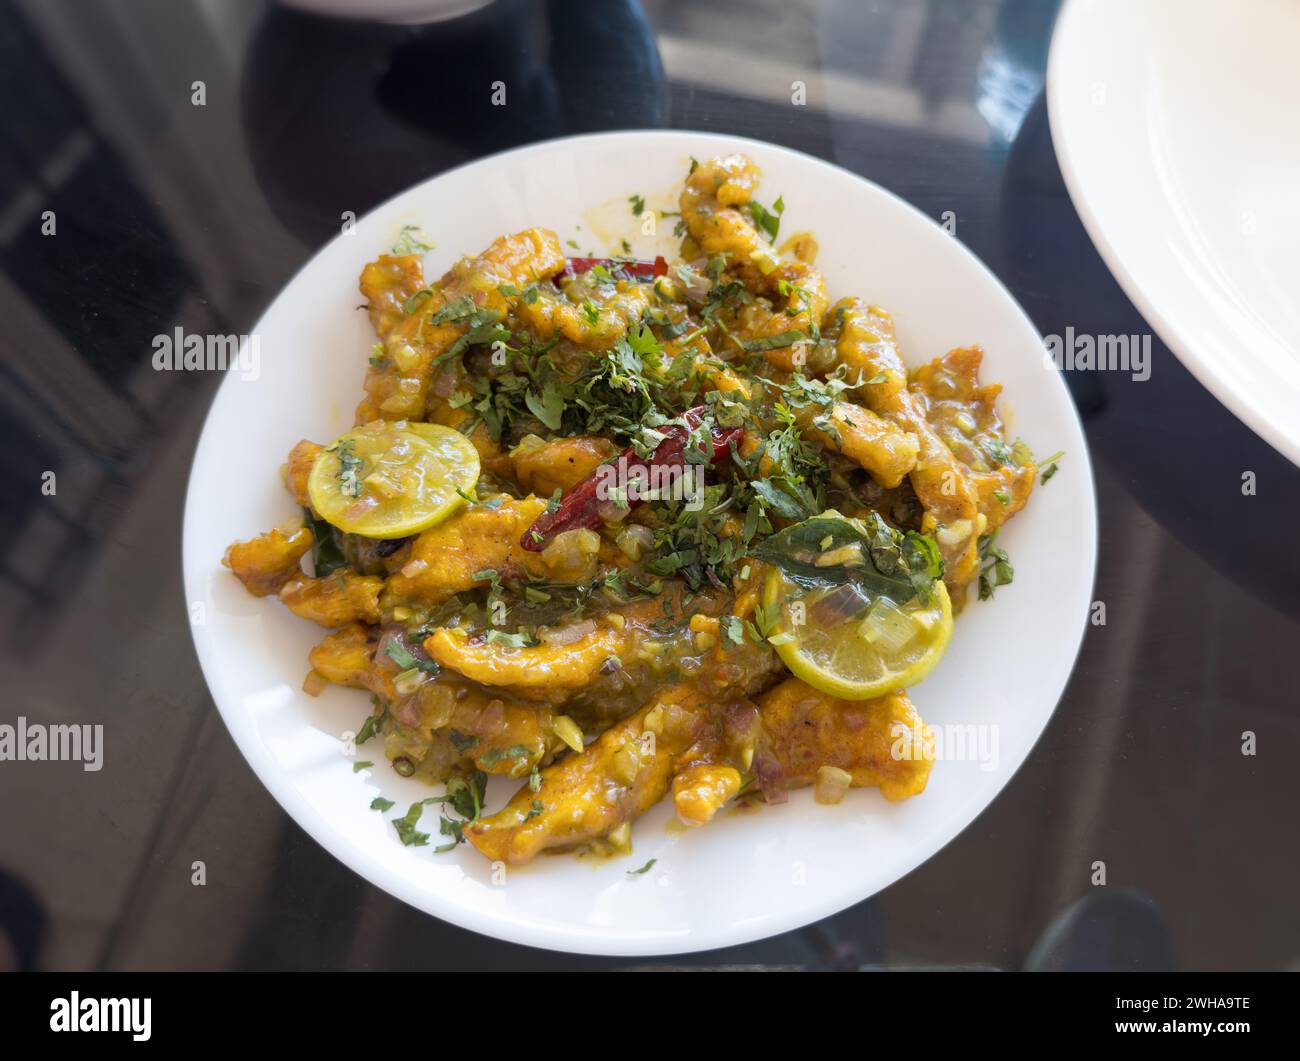 Lemon chicken cooked to perfection and served in a white plate and placed on glass table background. Stock Photo